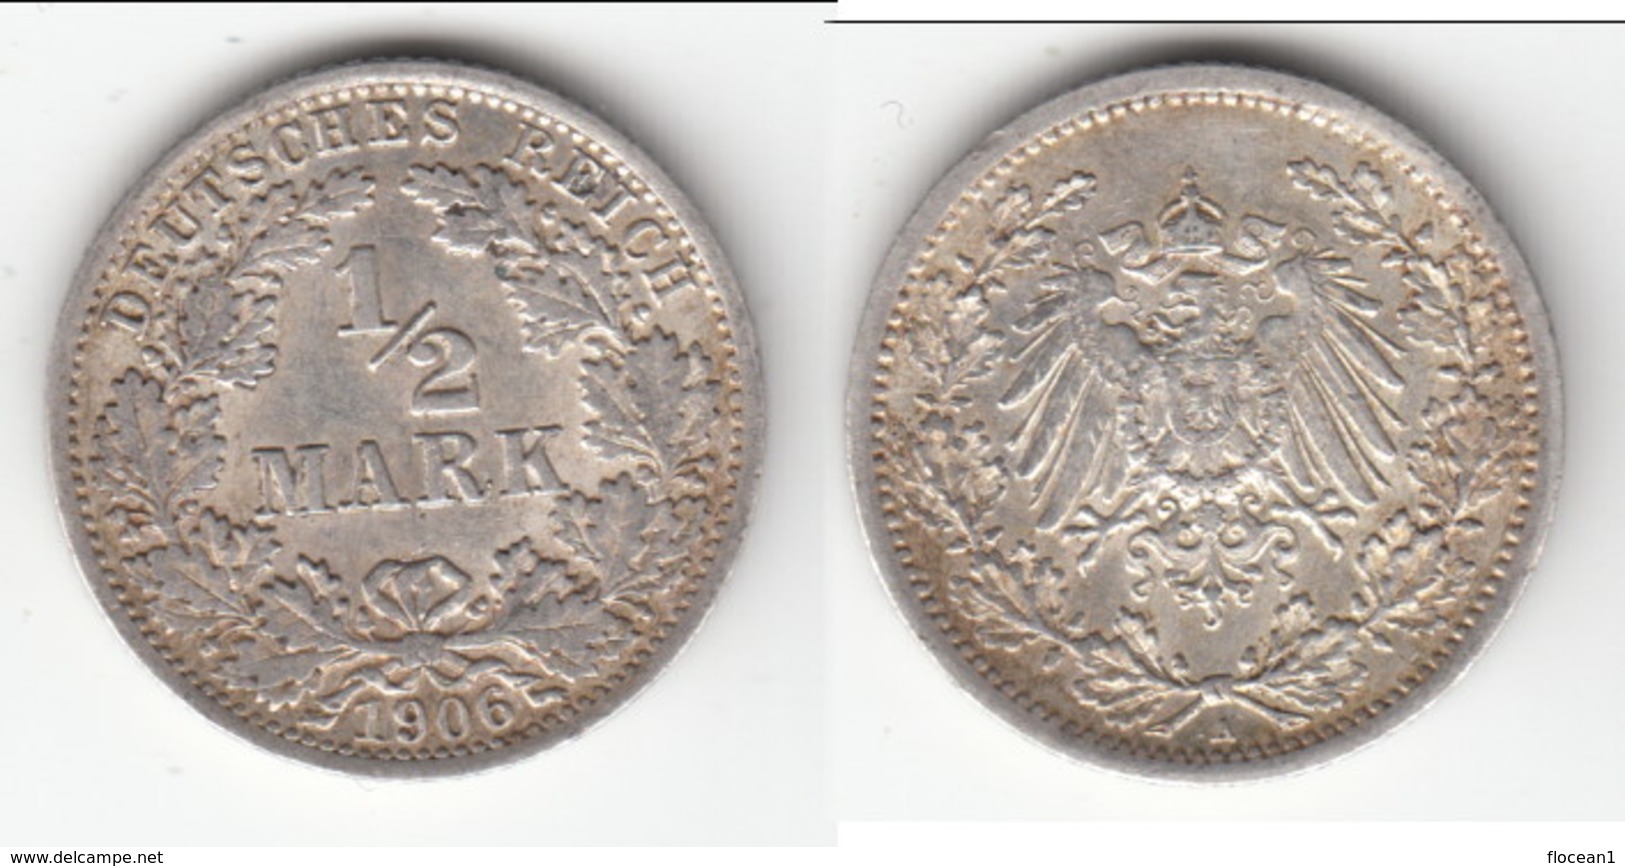 **** ALLEMAGNE - GERMANY - HALF MARK 1906 A -1/2 MARK 1906 A - EMPIRE - ARGENT - SILVER **** EN ACHAT IMMEDIAT - 1/2 Mark